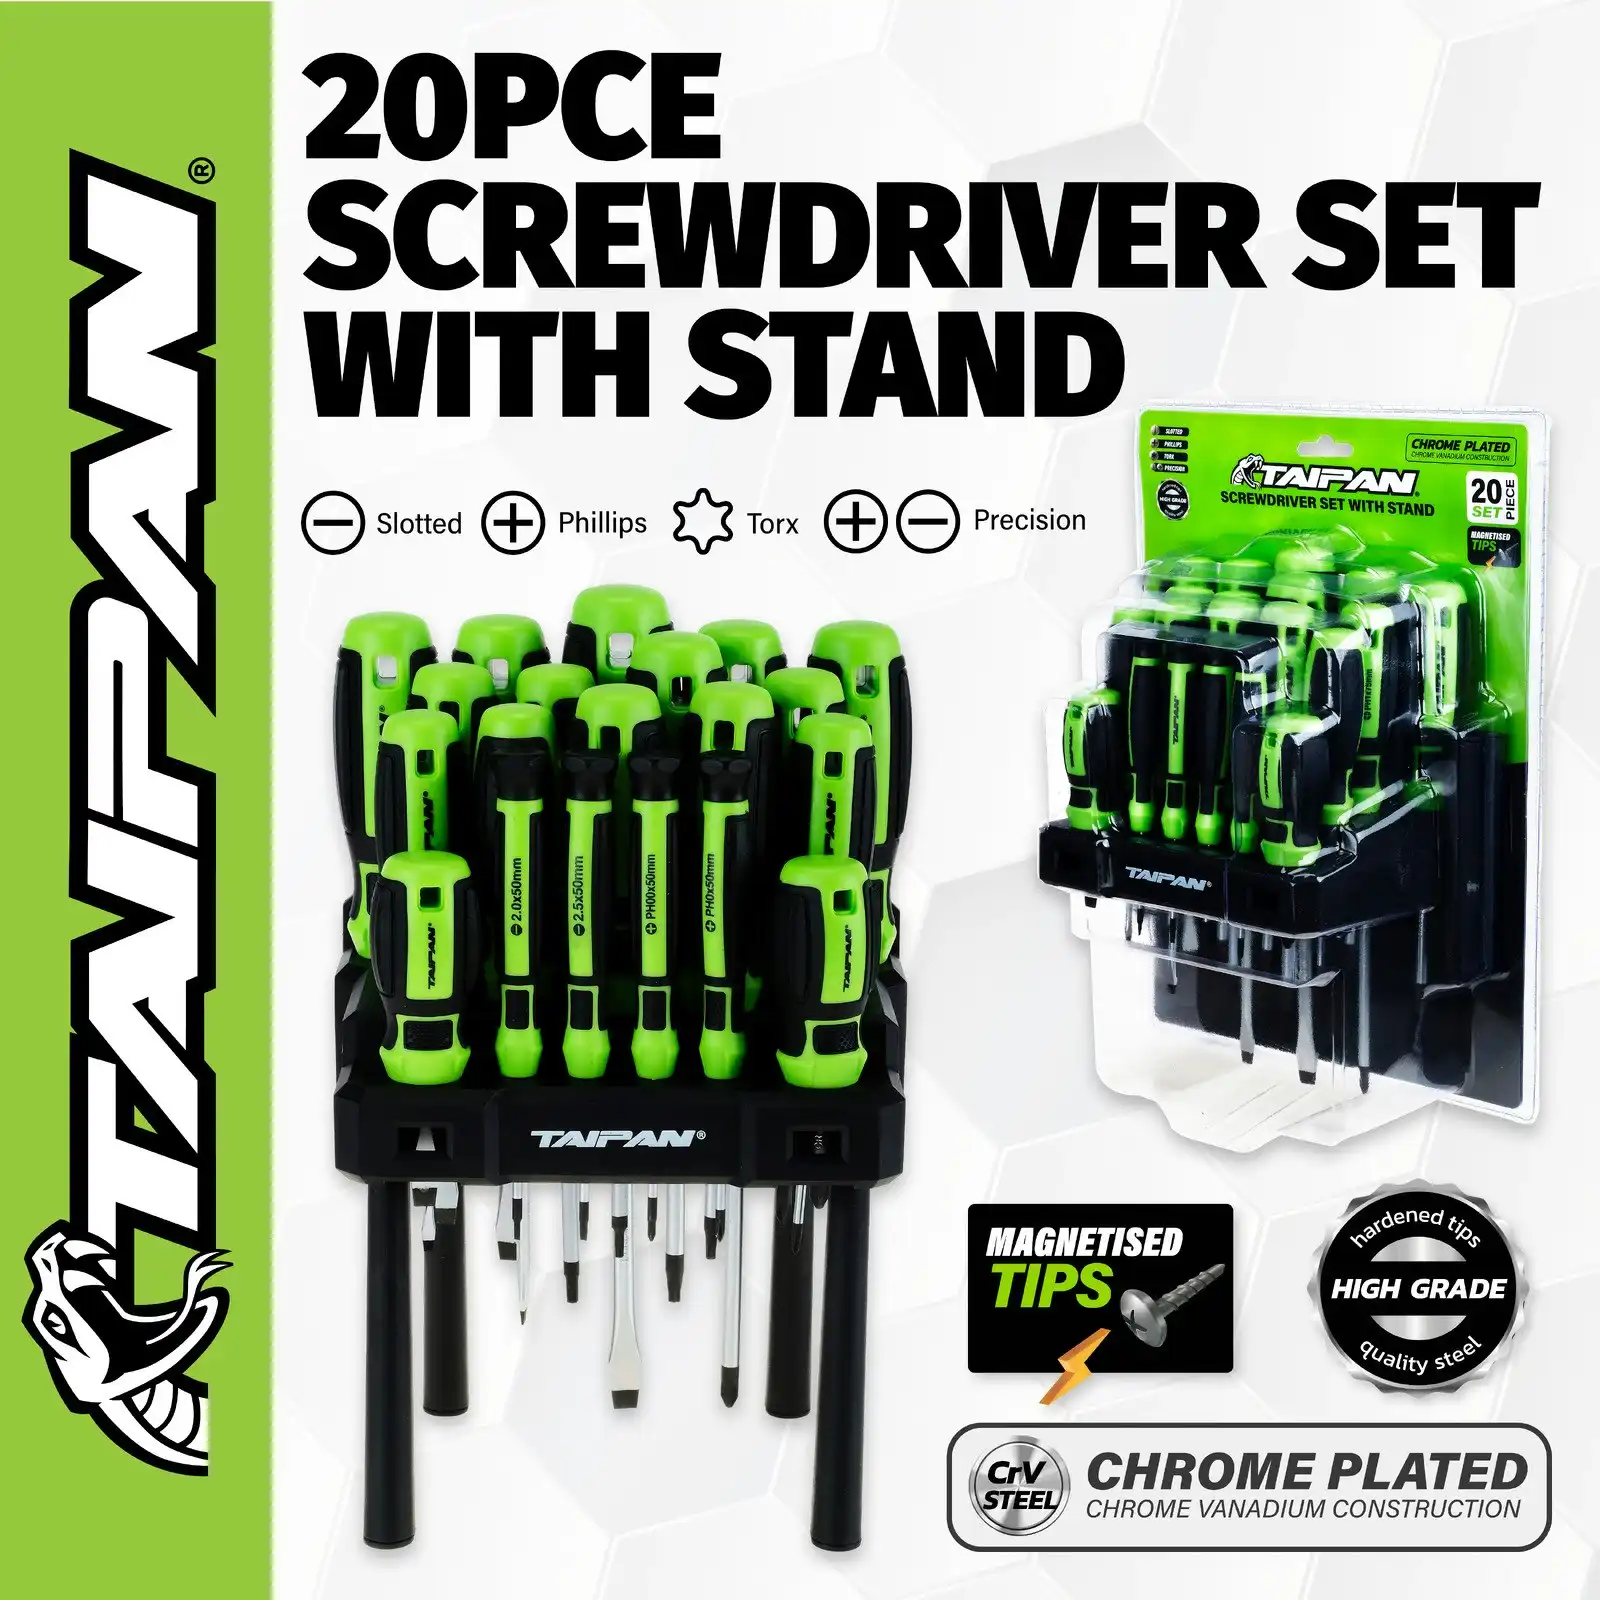 Taipan® 20PCE Screwdriver Set With Stand Magnetic Tips Chrome Plated